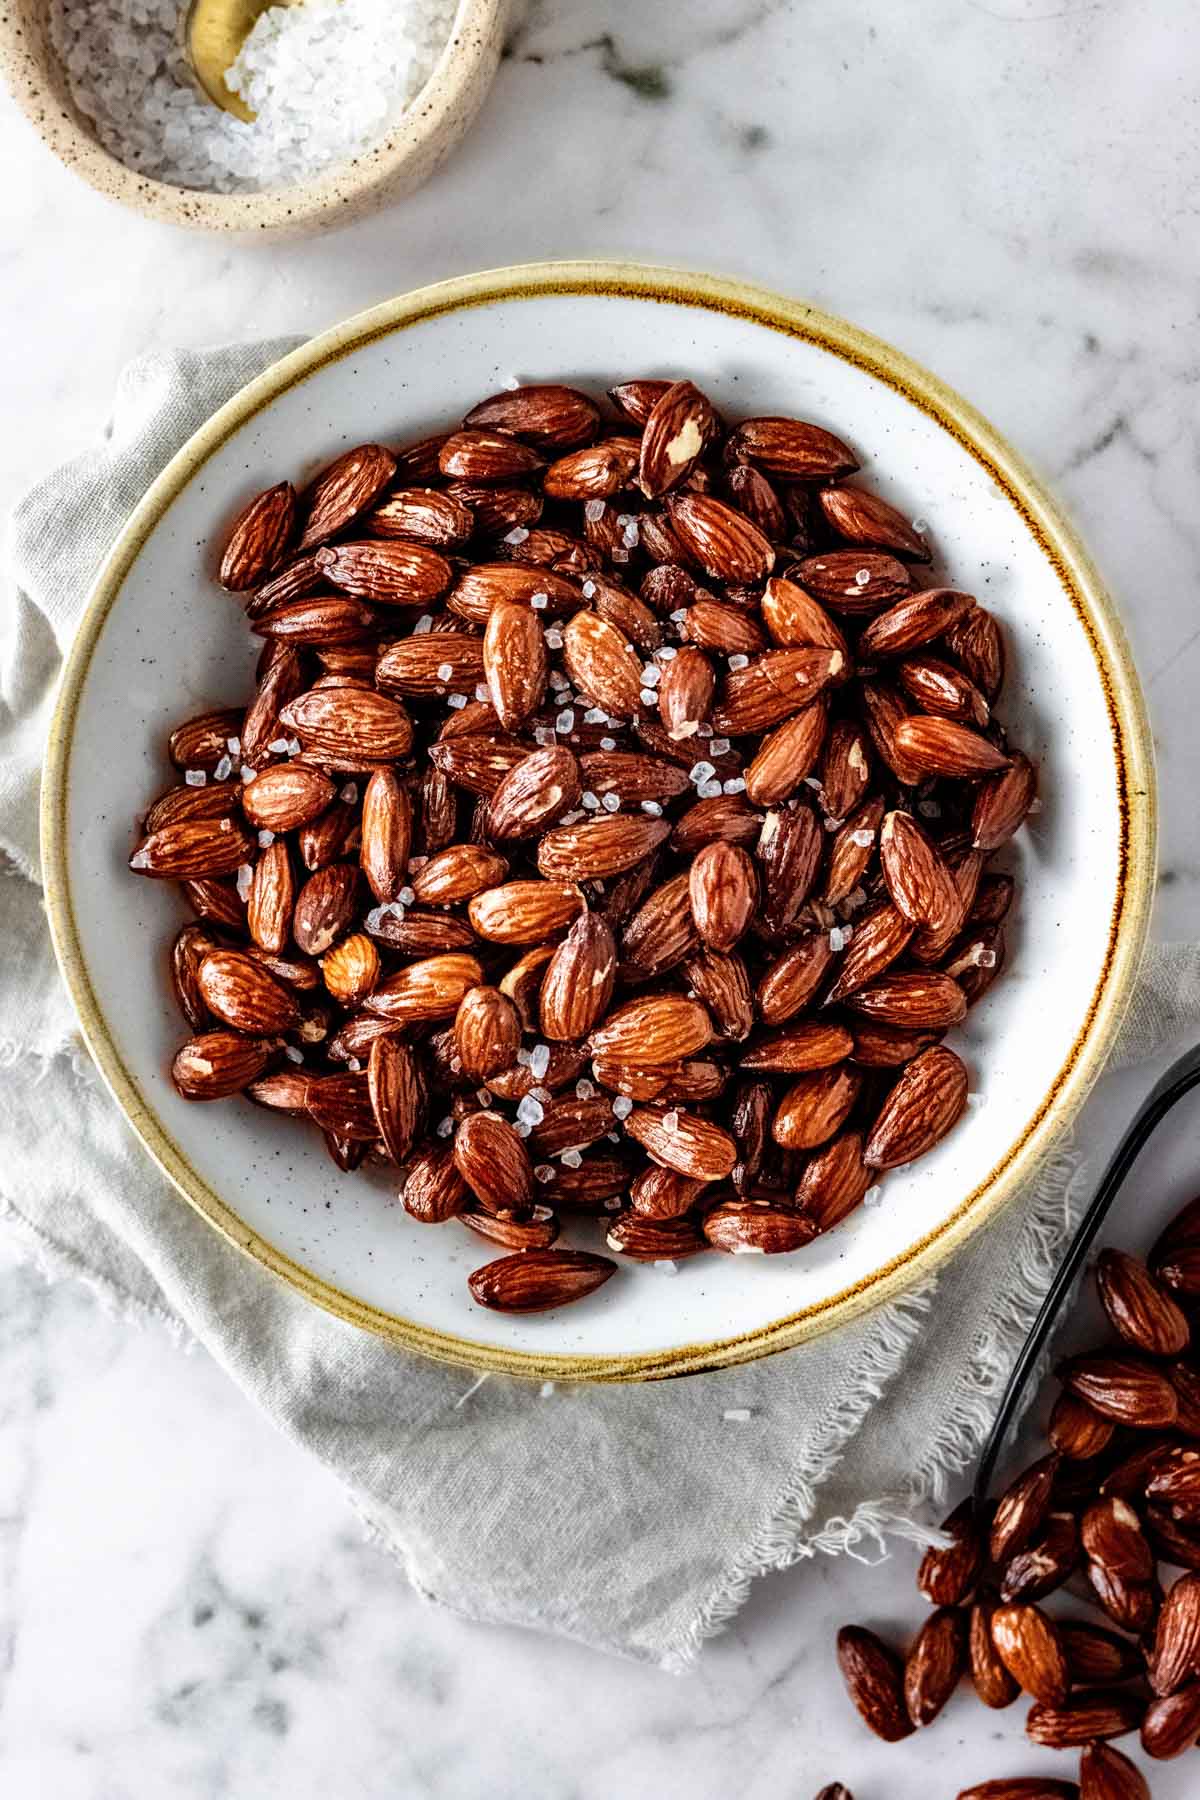 A white bowl with a gold rim filled with air fryer roasted almonds set on a neutral frayed napkin.